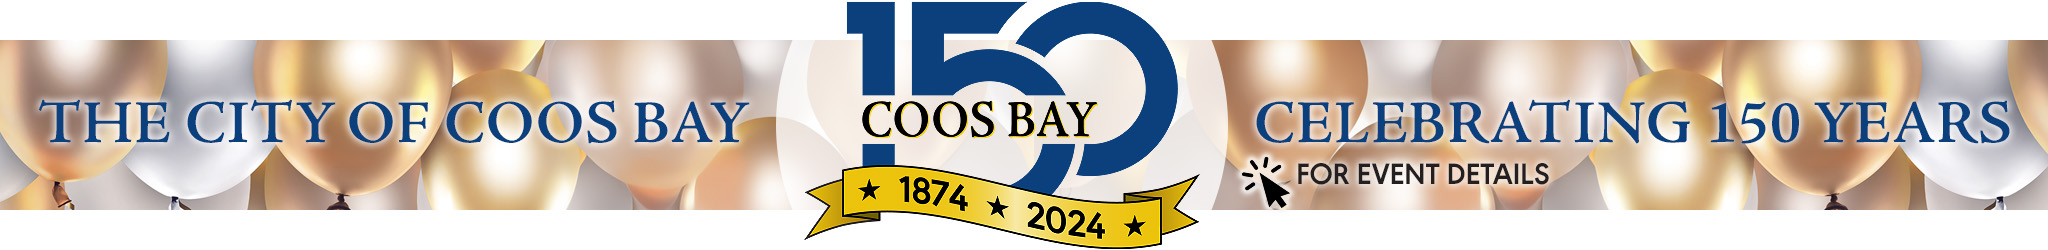 City of Coos Bay Celebrating 150 Years logo and banner